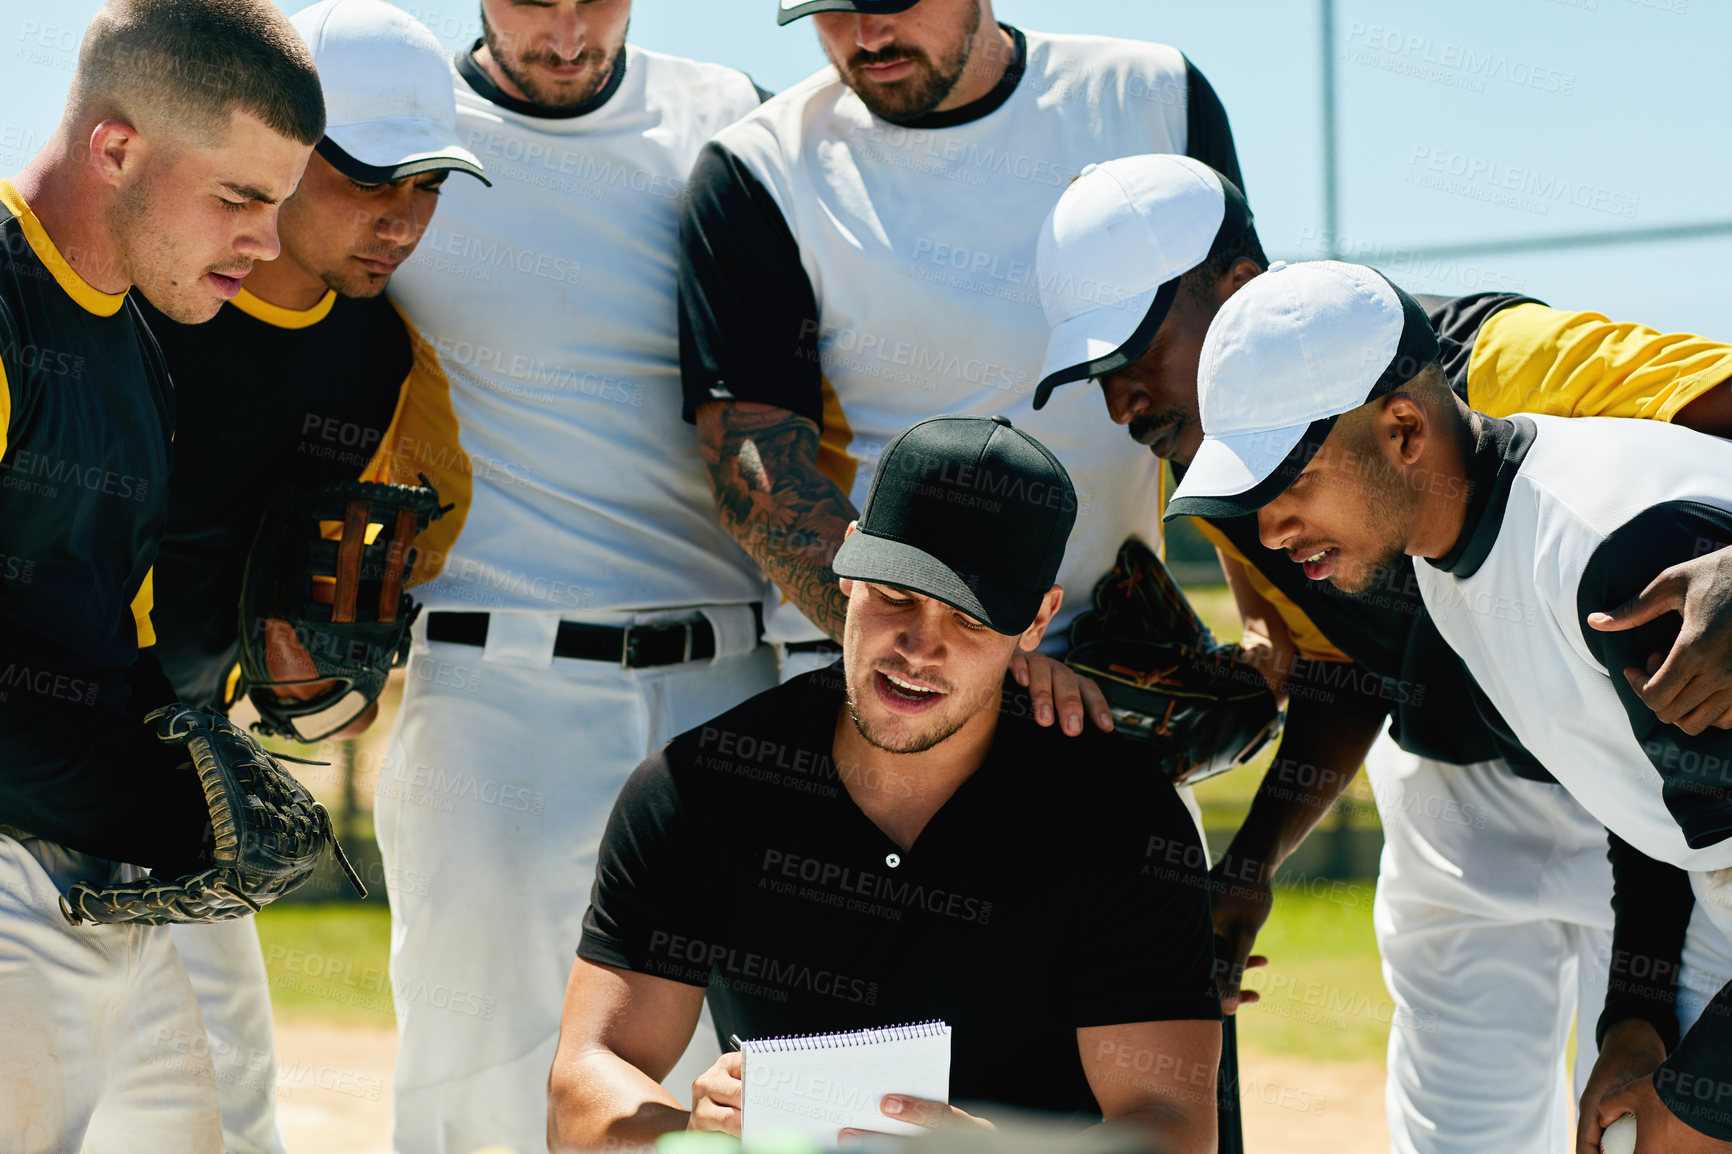 Buy stock photo Cropped shot of a group of young baseball players having a meeting with their coach on the field during the day